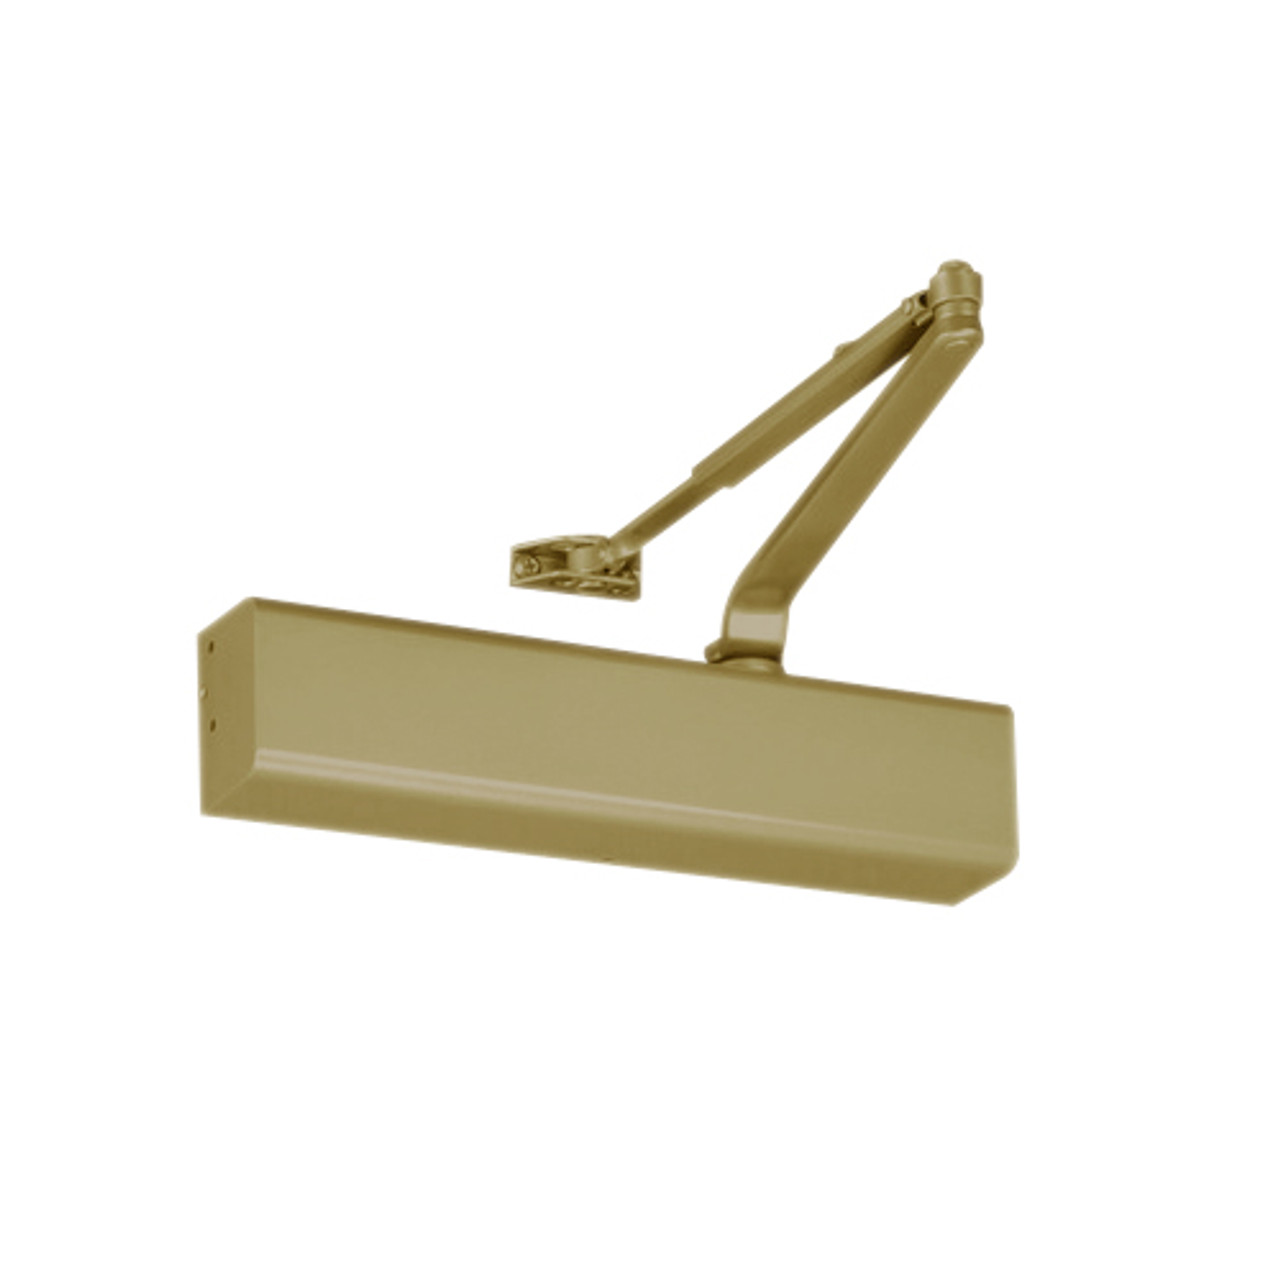 8501-696 Norton 8000 Series Full Cover Non-Hold Open Door Closers with Regular Parallel and Top Jamb to 3 inch Reveal in Gold Finish